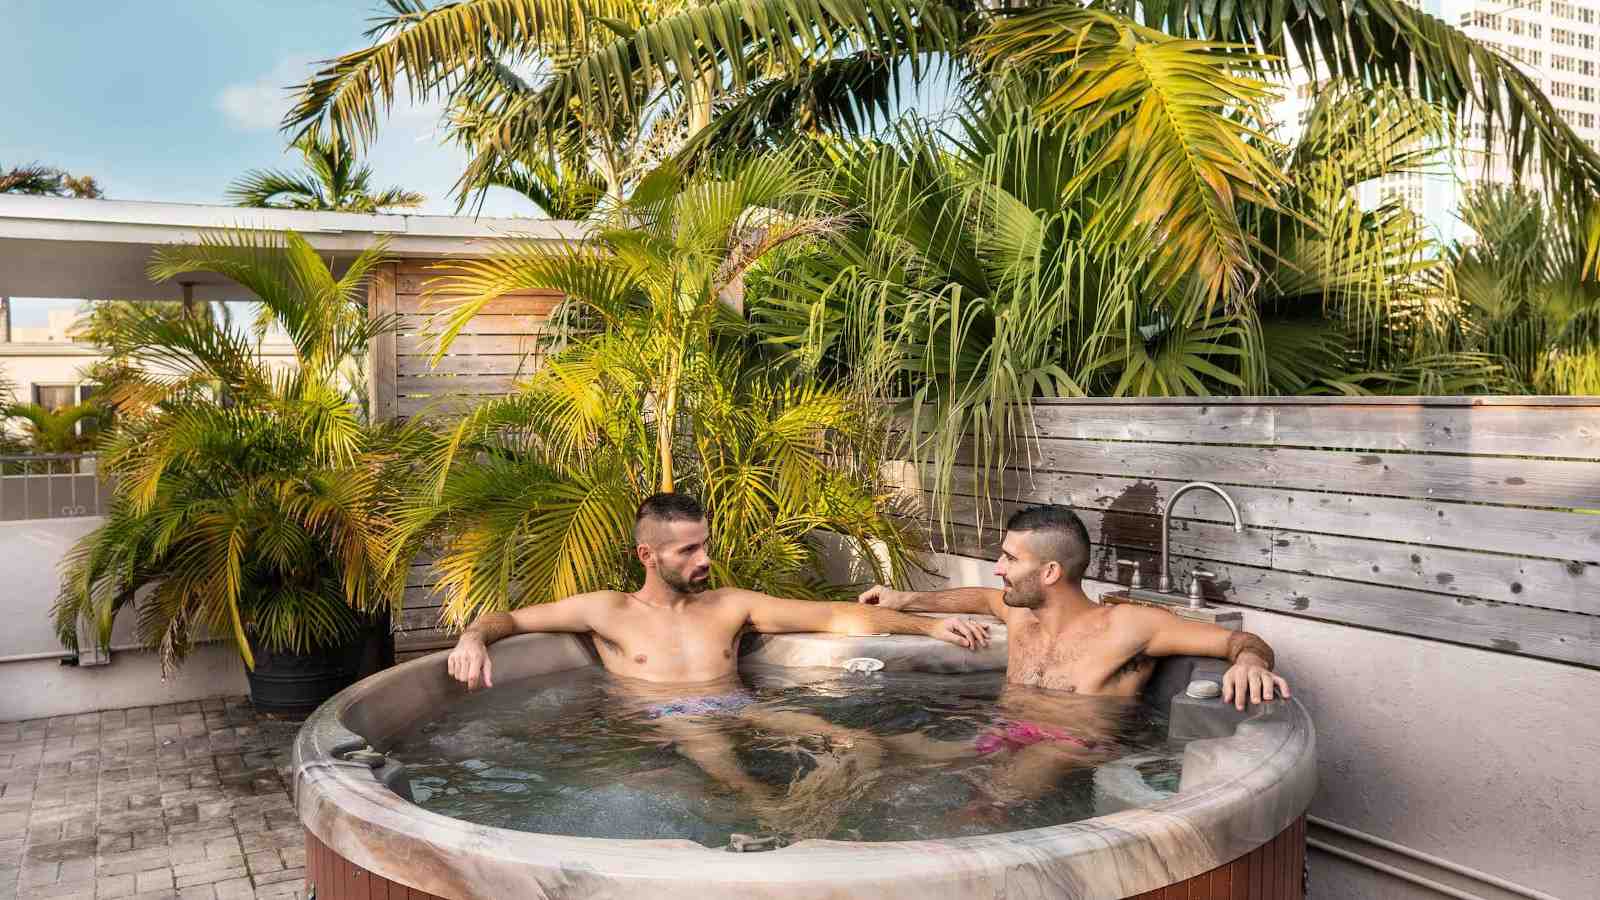 The Grand Resort and Spa is one of the most famous gay resorts in Fort Laud...